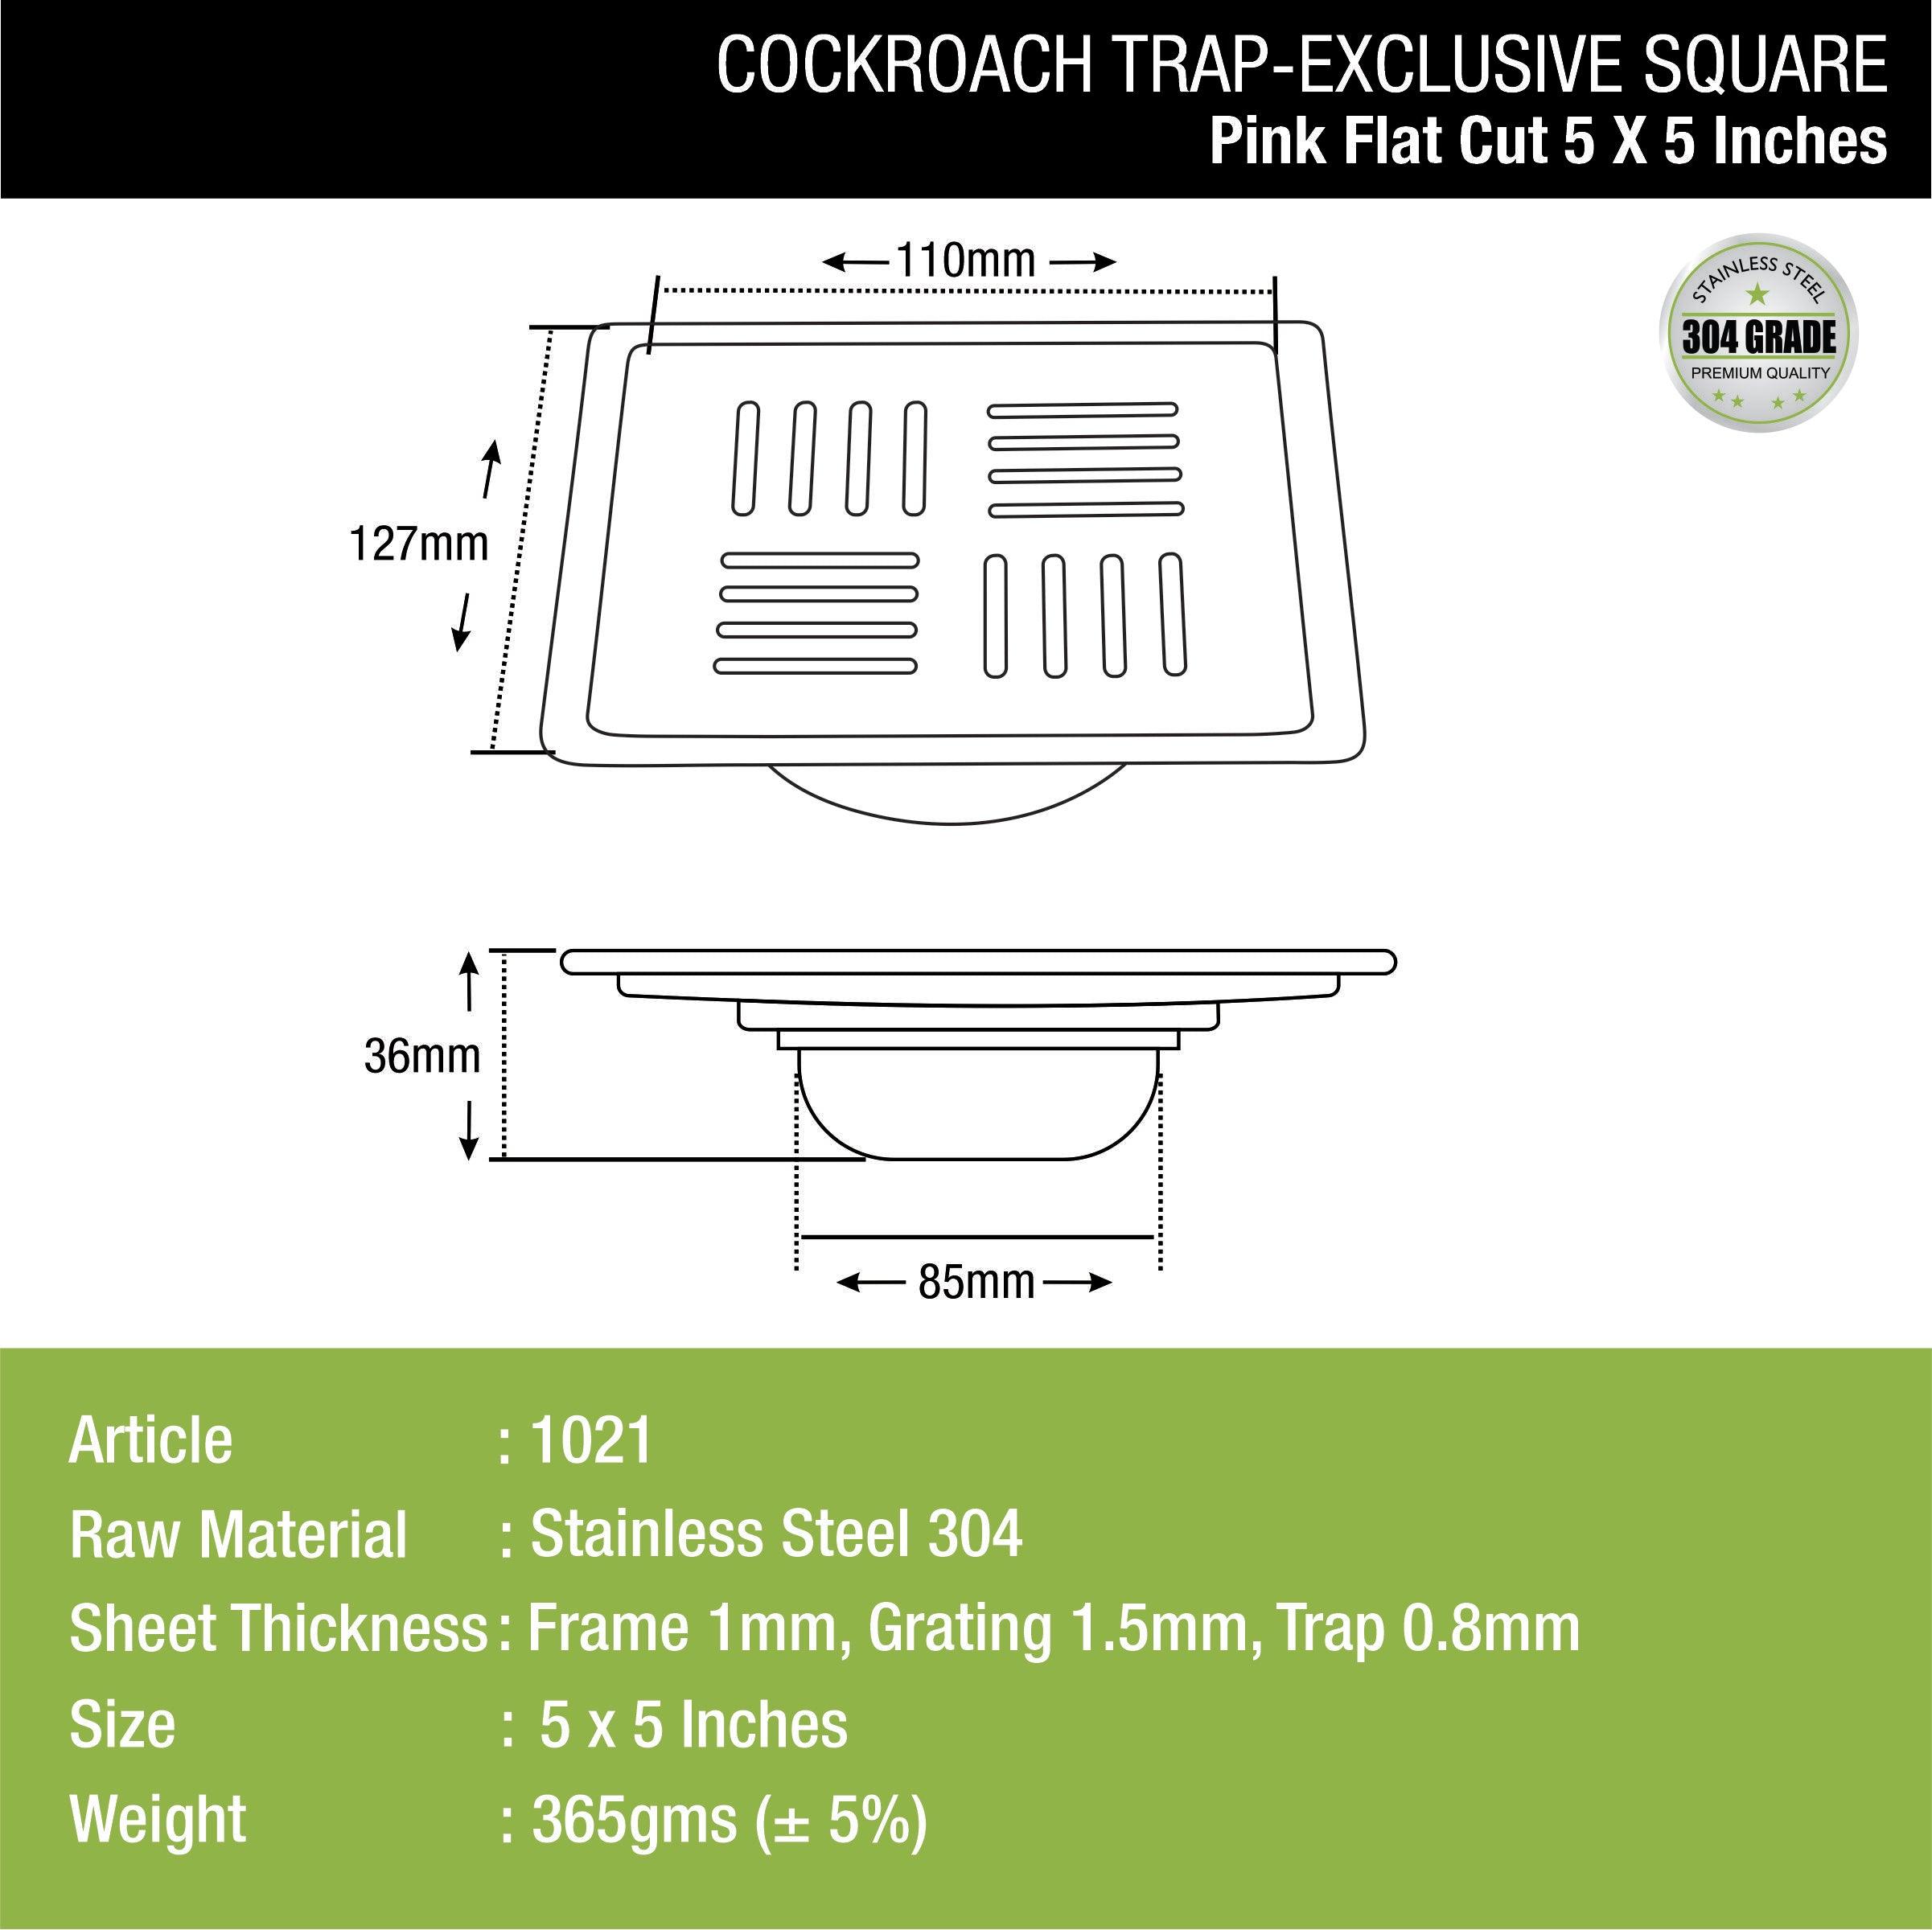 Pink Exclusive Square Flat Cut Floor Drain (5 x 5 Inches) with Cockroach Trap dimensions and sizes